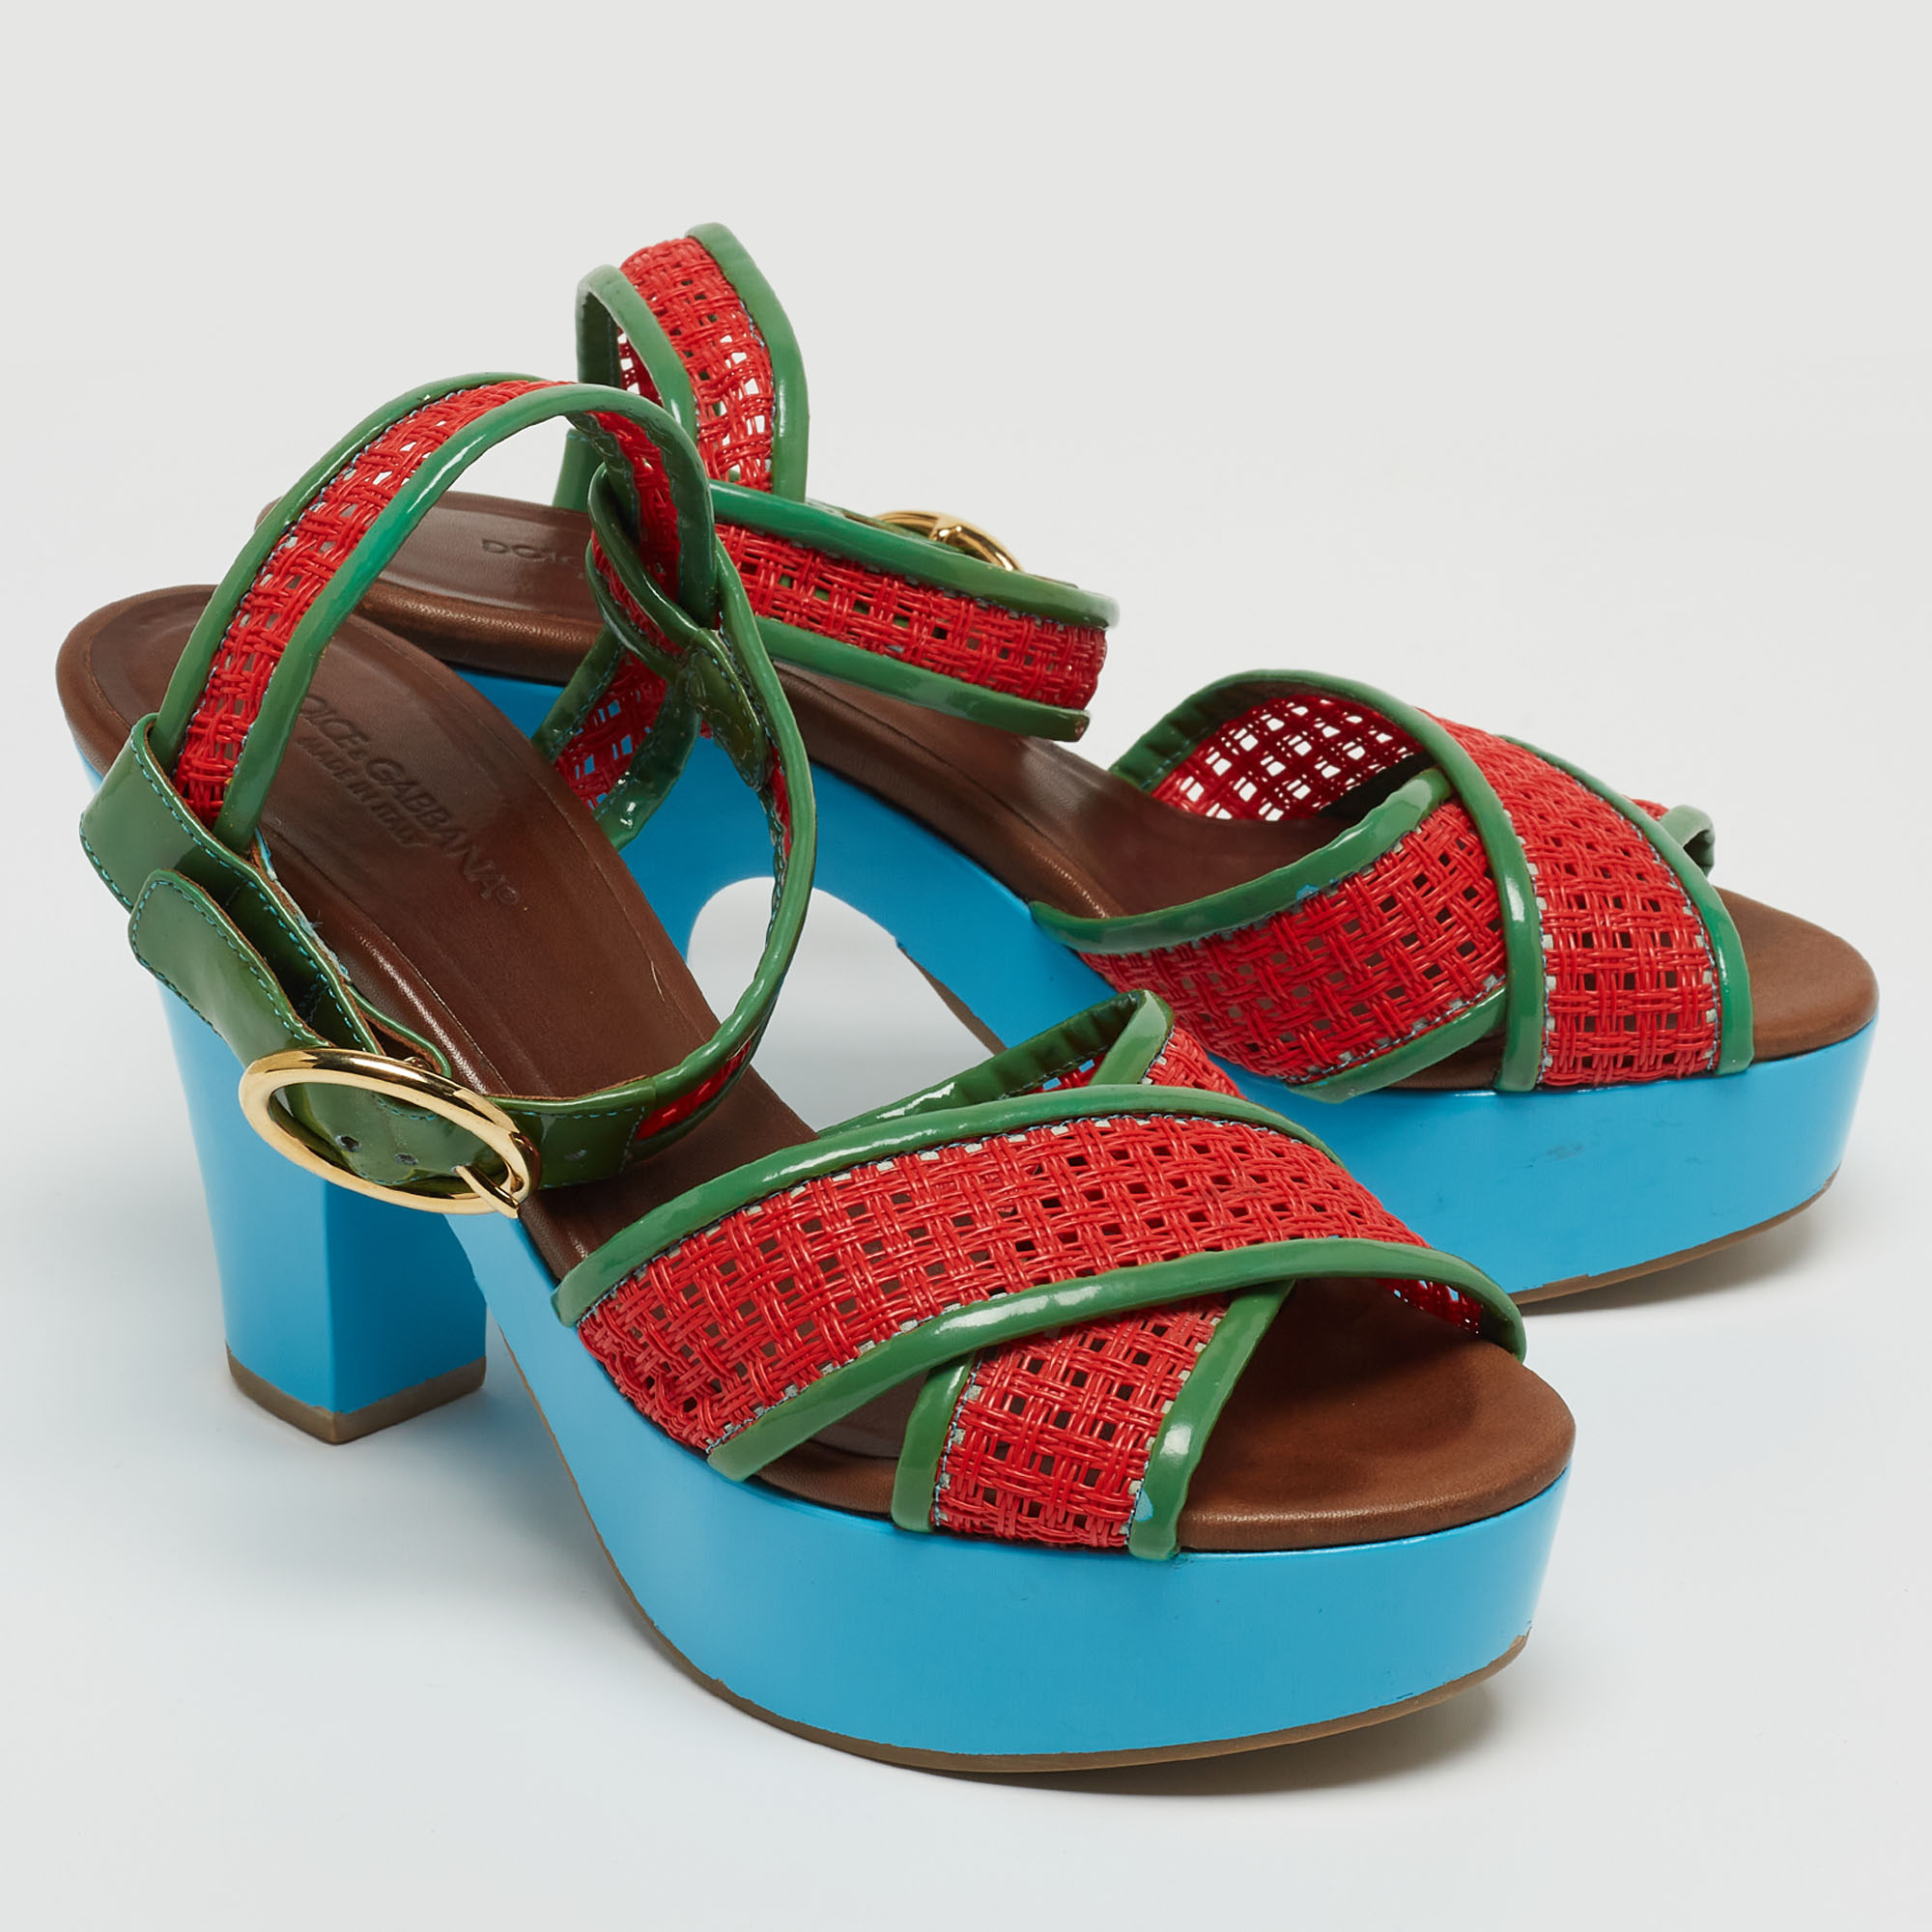 Dolce & Gabbana Green/Red Patent Leather Cross Strap Platform Ankle Strap Sandals Size 38